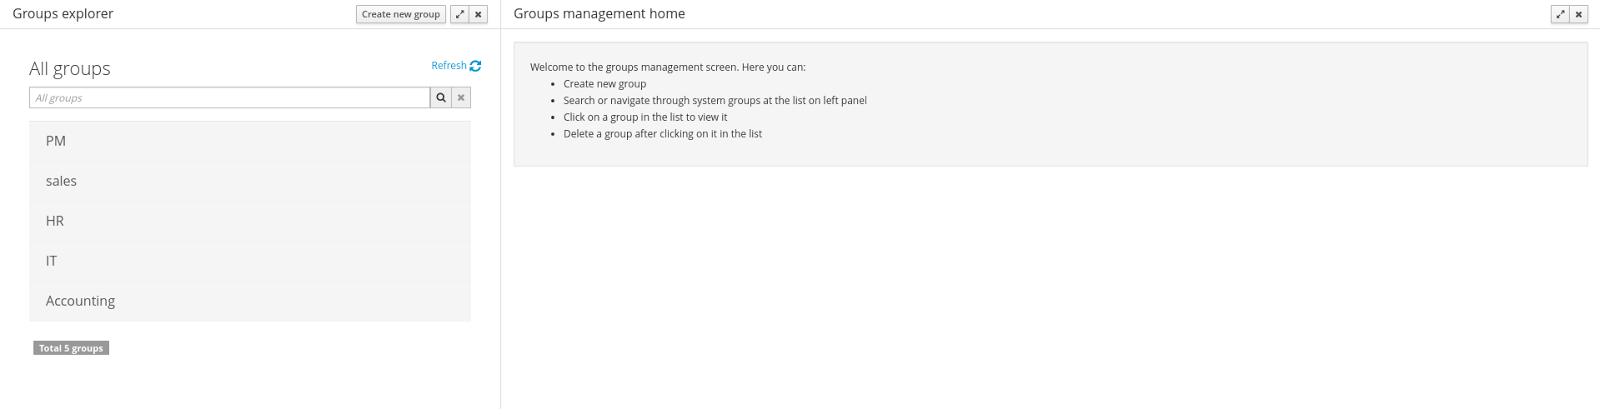 Group management perspective